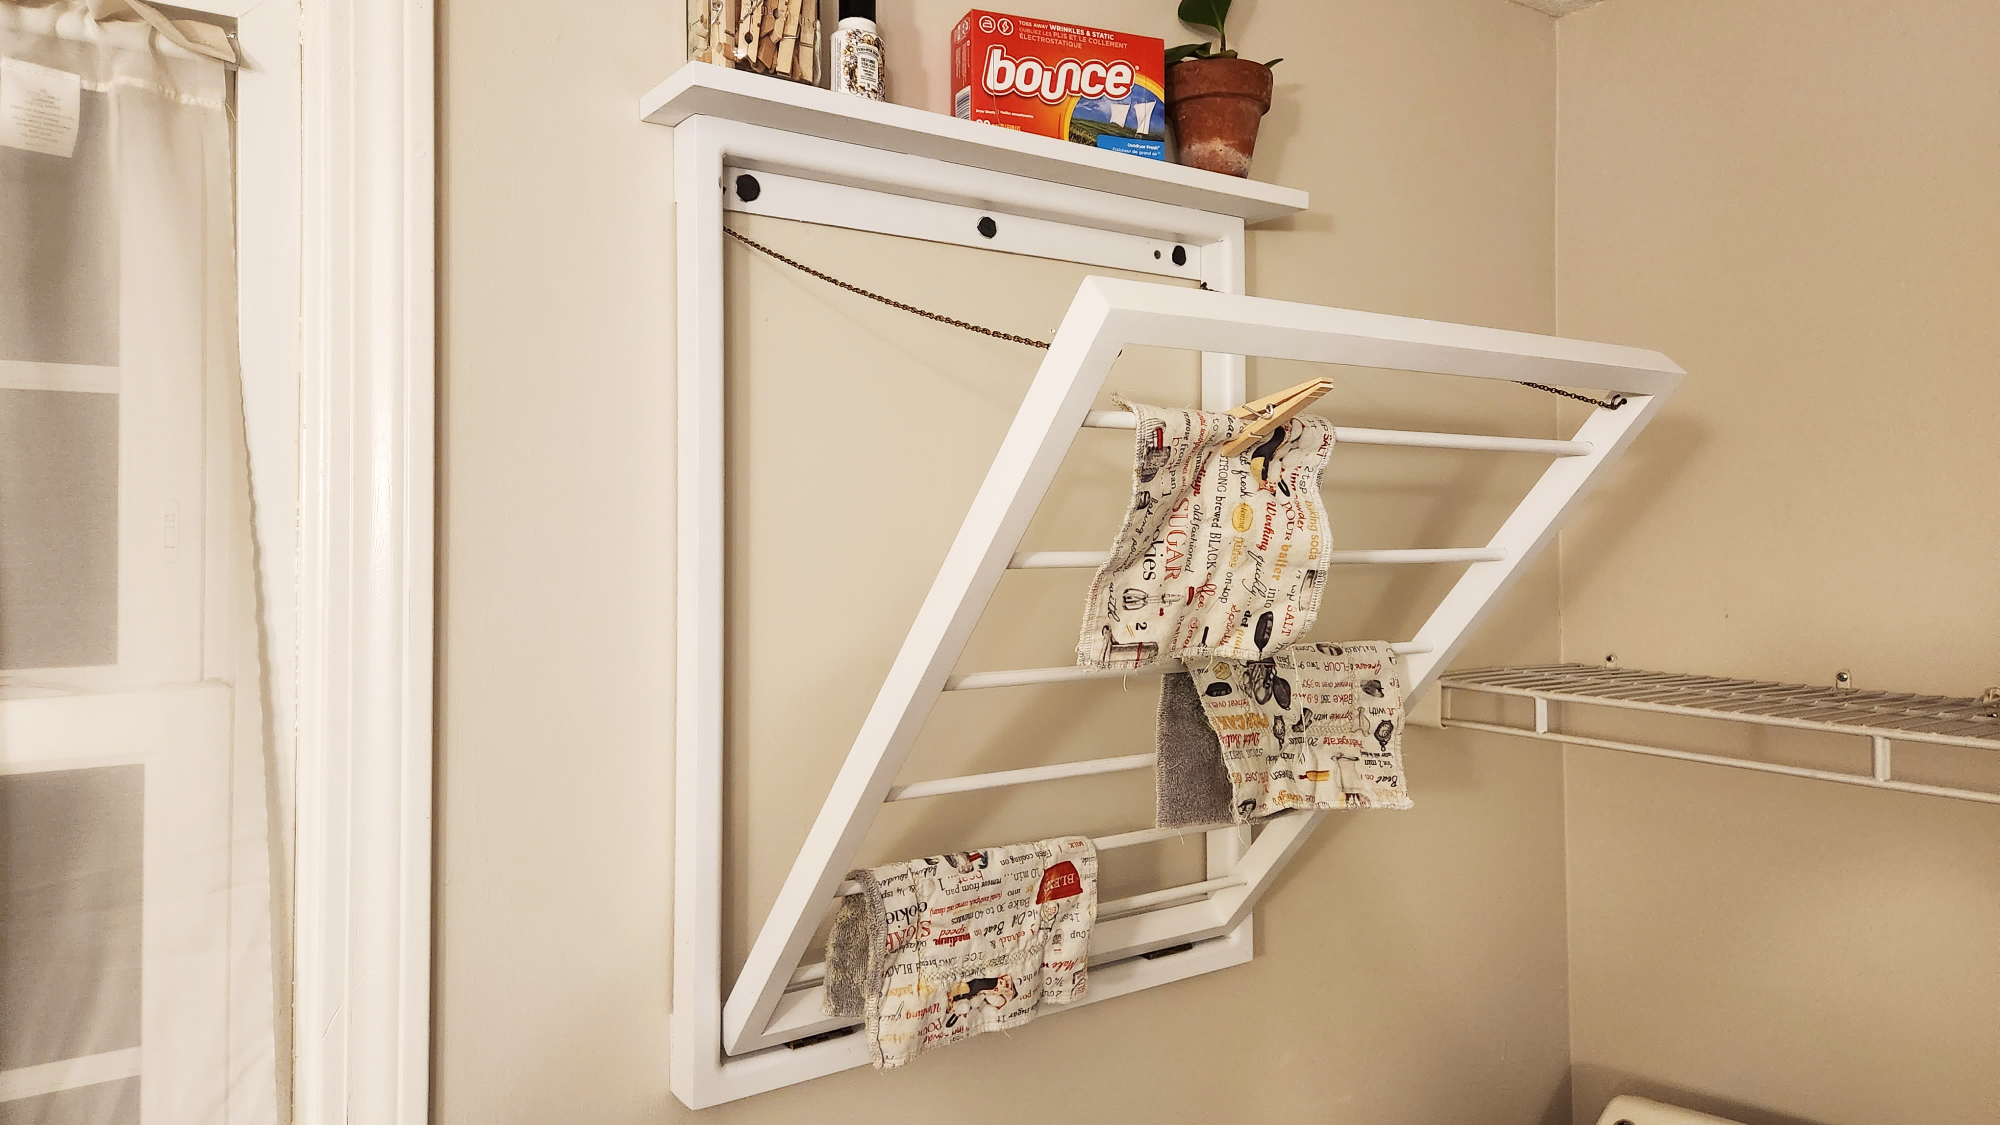 10 Best Drying Racks for Clothes - Top Drying Racks to Buy